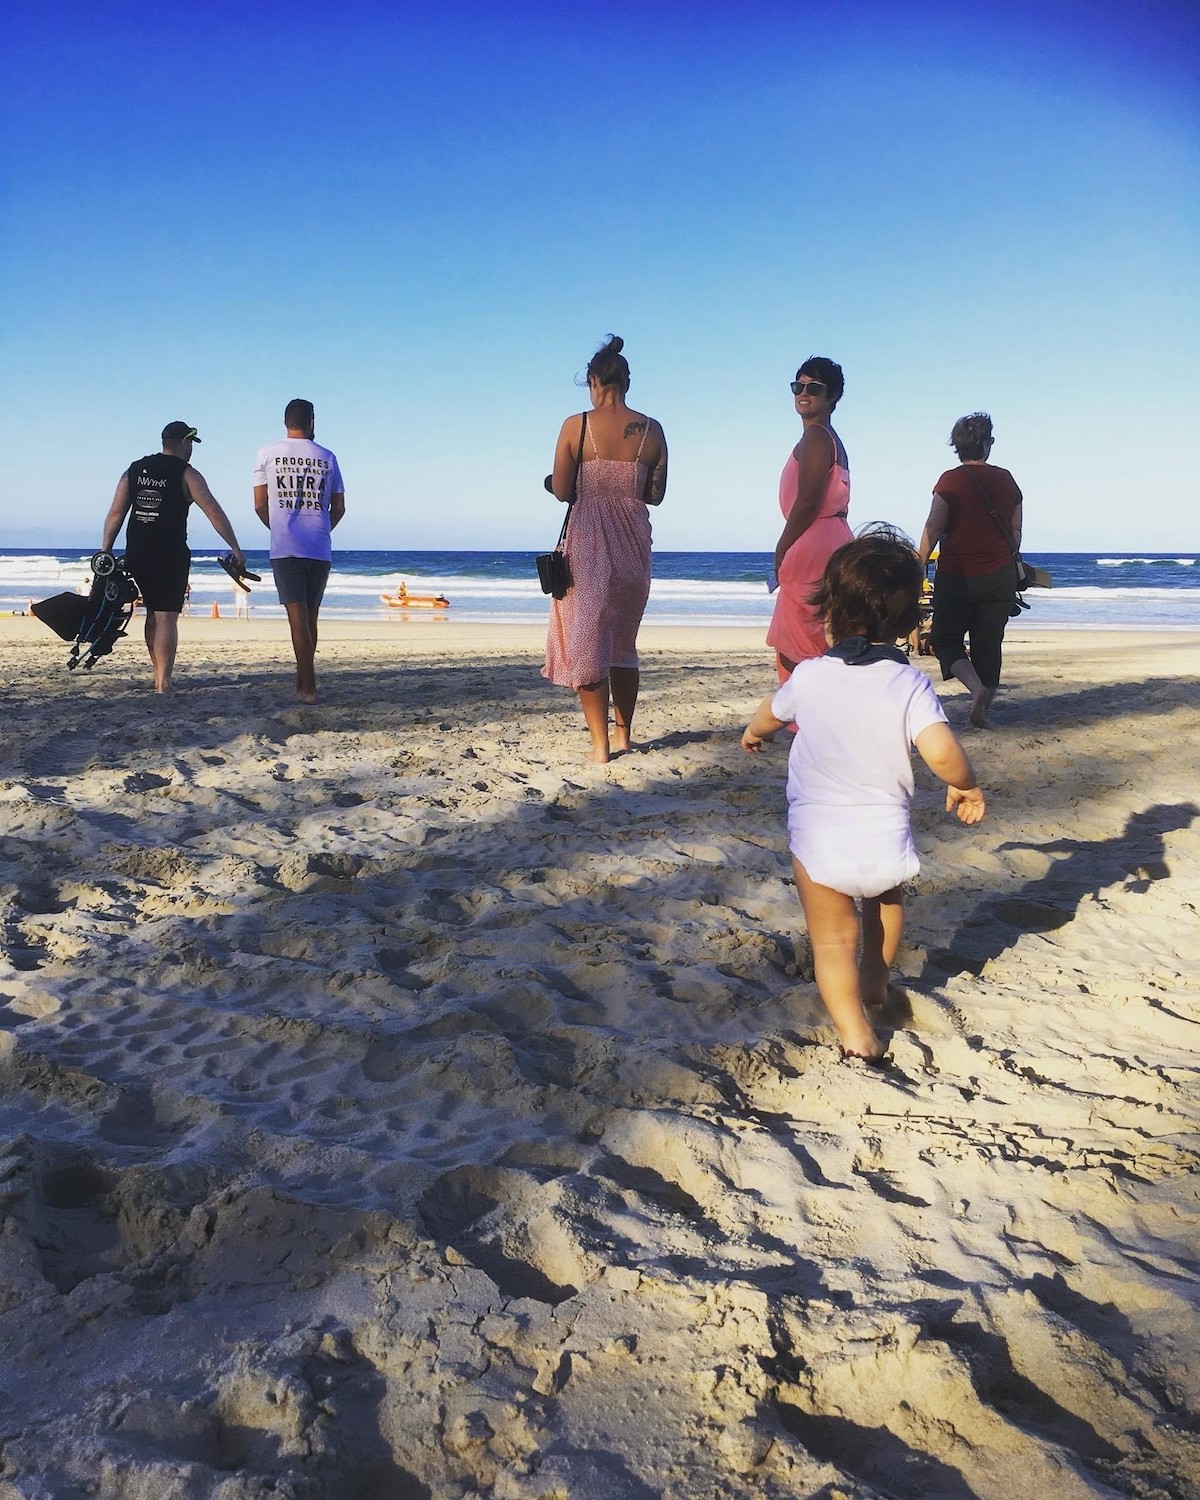 Our last family holiday together was a week-long gorgeous Gold Coast beach stay. This is Luke’s very first trip to the beach 